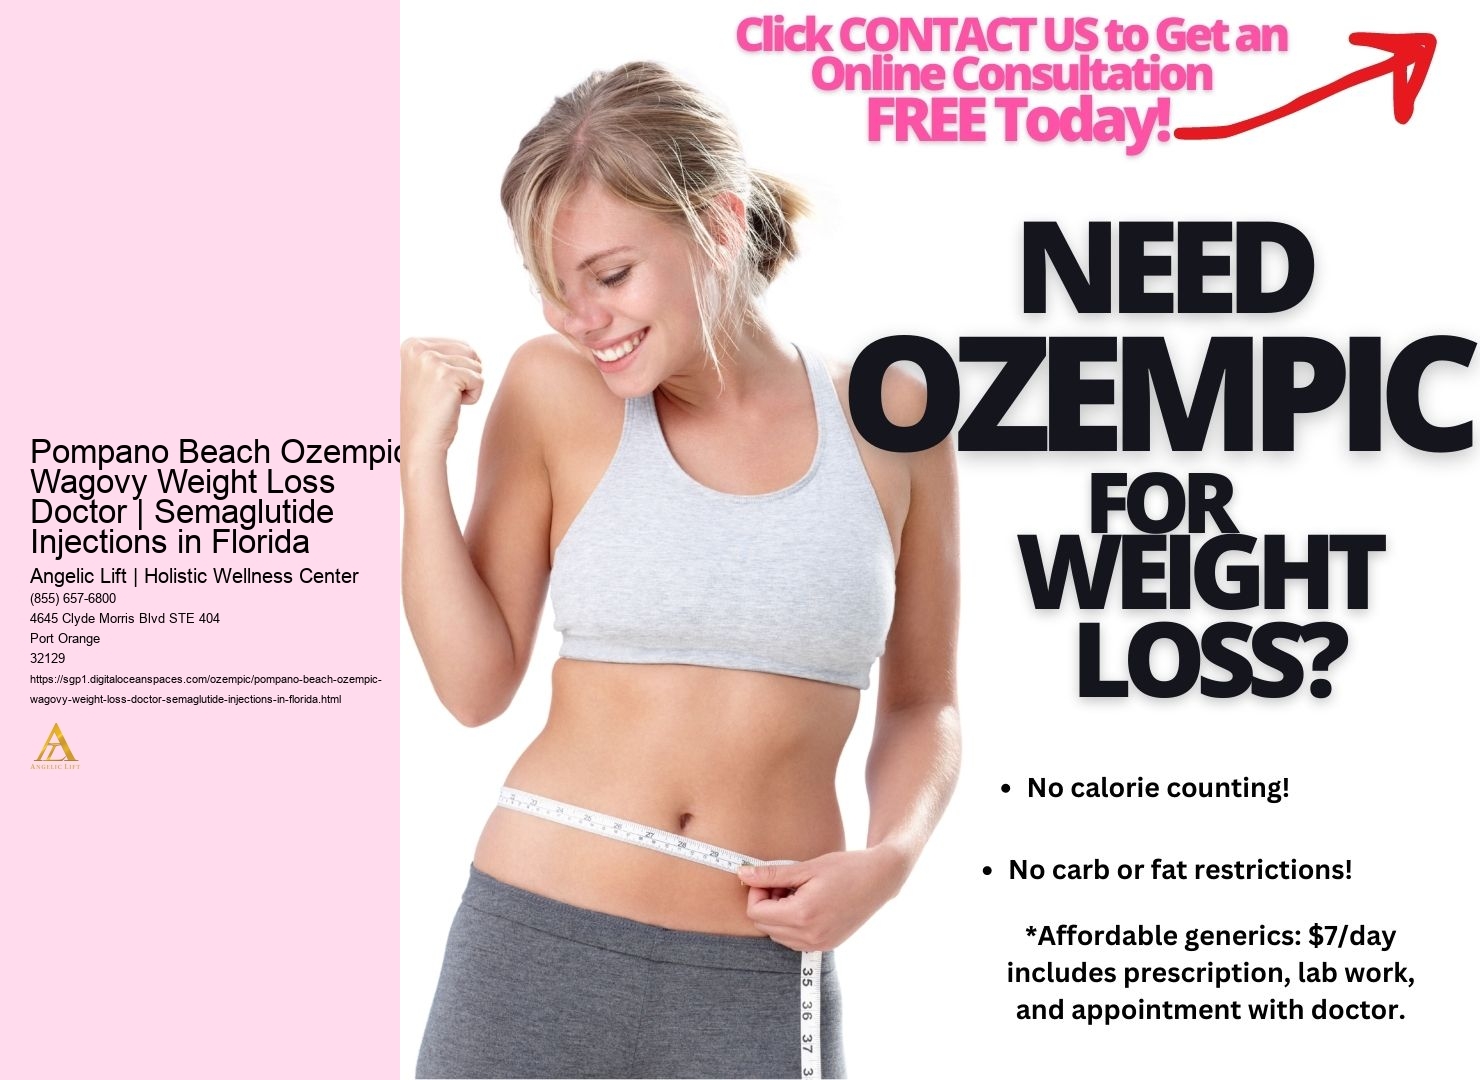 Pompano Beach Ozempic & Wagovy Weight Loss Doctor | Semaglutide Injections in Florida